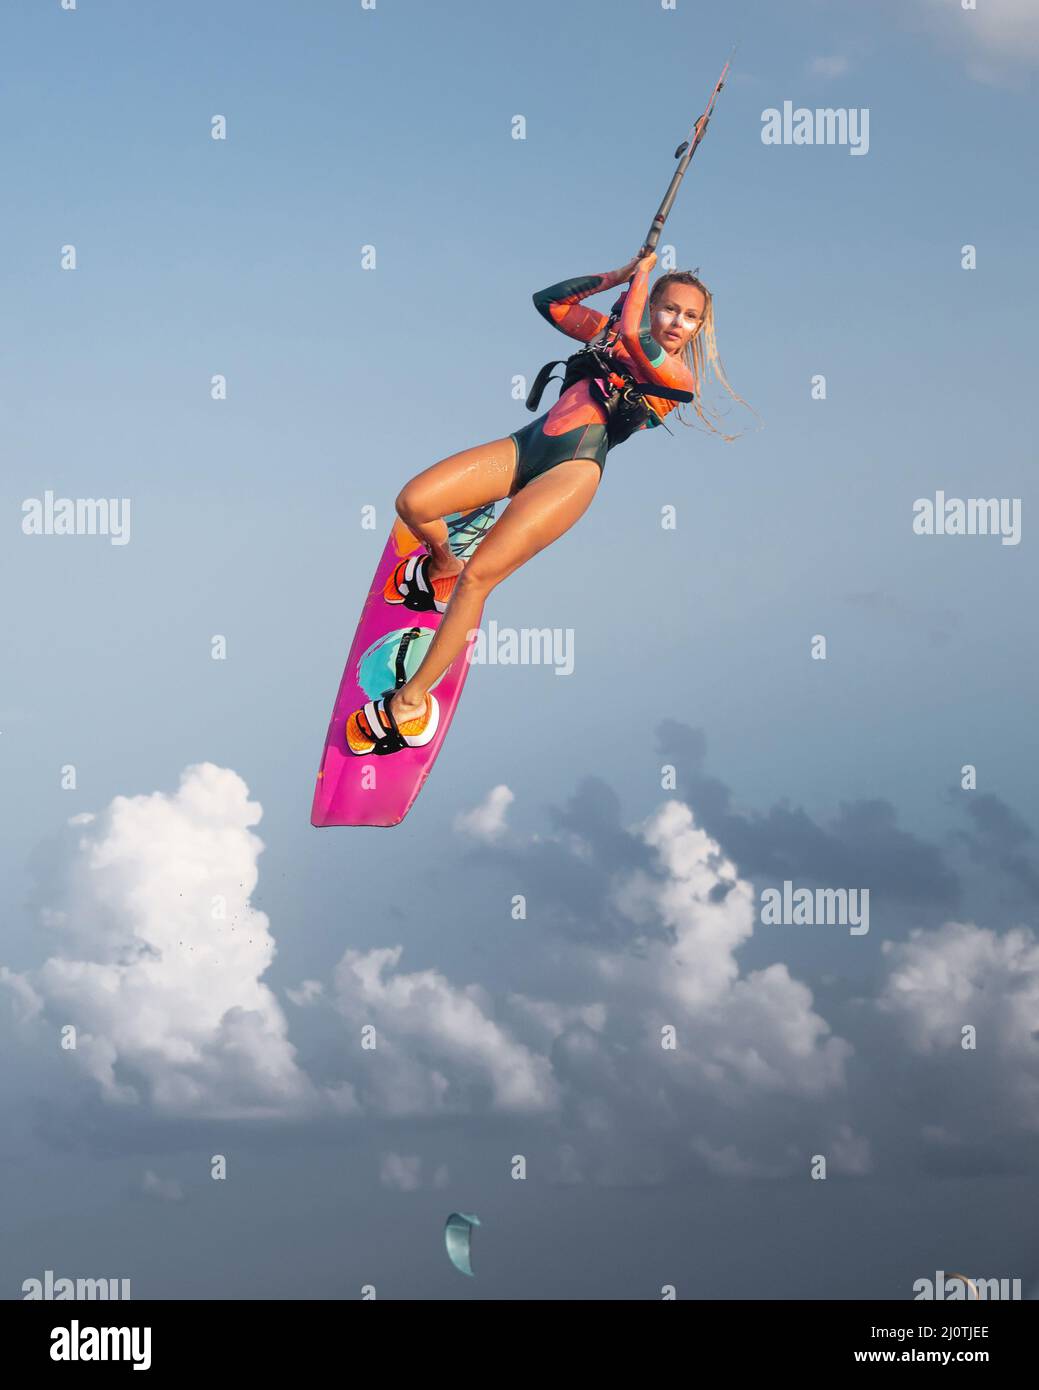 Professional athlete kitesurfer young caucasian woman doing a trick in the air against the backdrop of the sunset sky and clouds Stock Photo